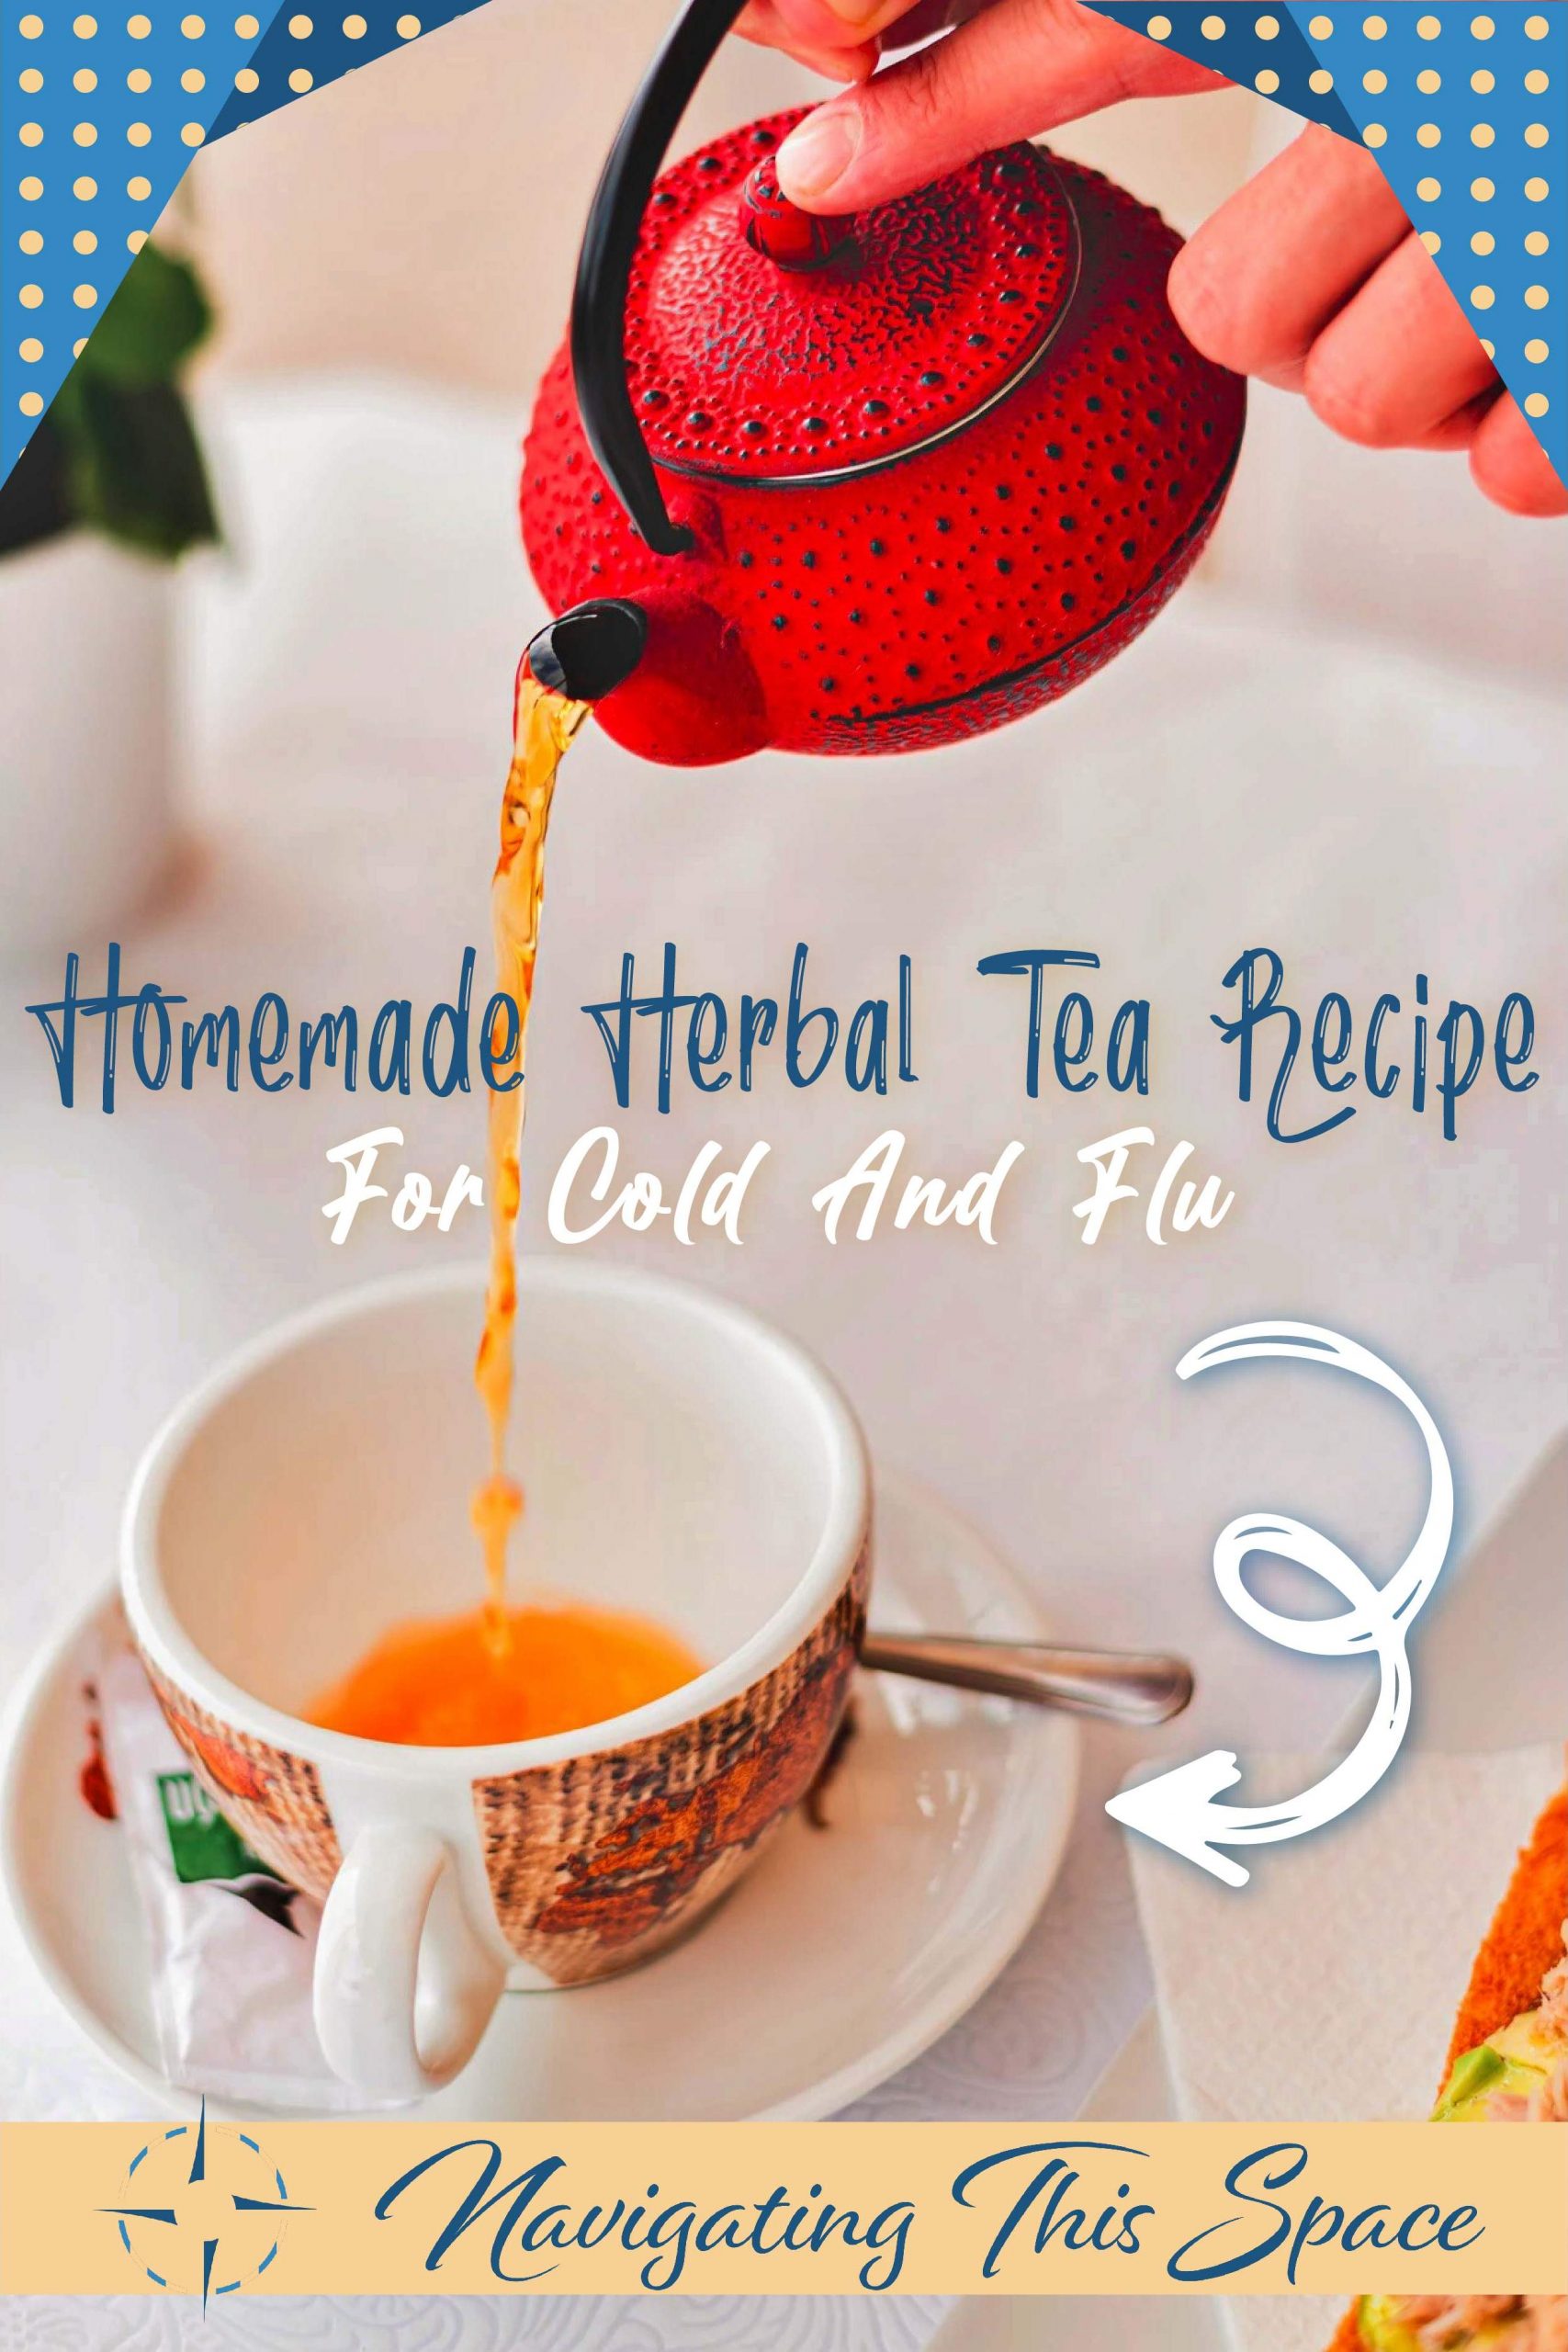 Homemade herbal tea recipe for cold and flu